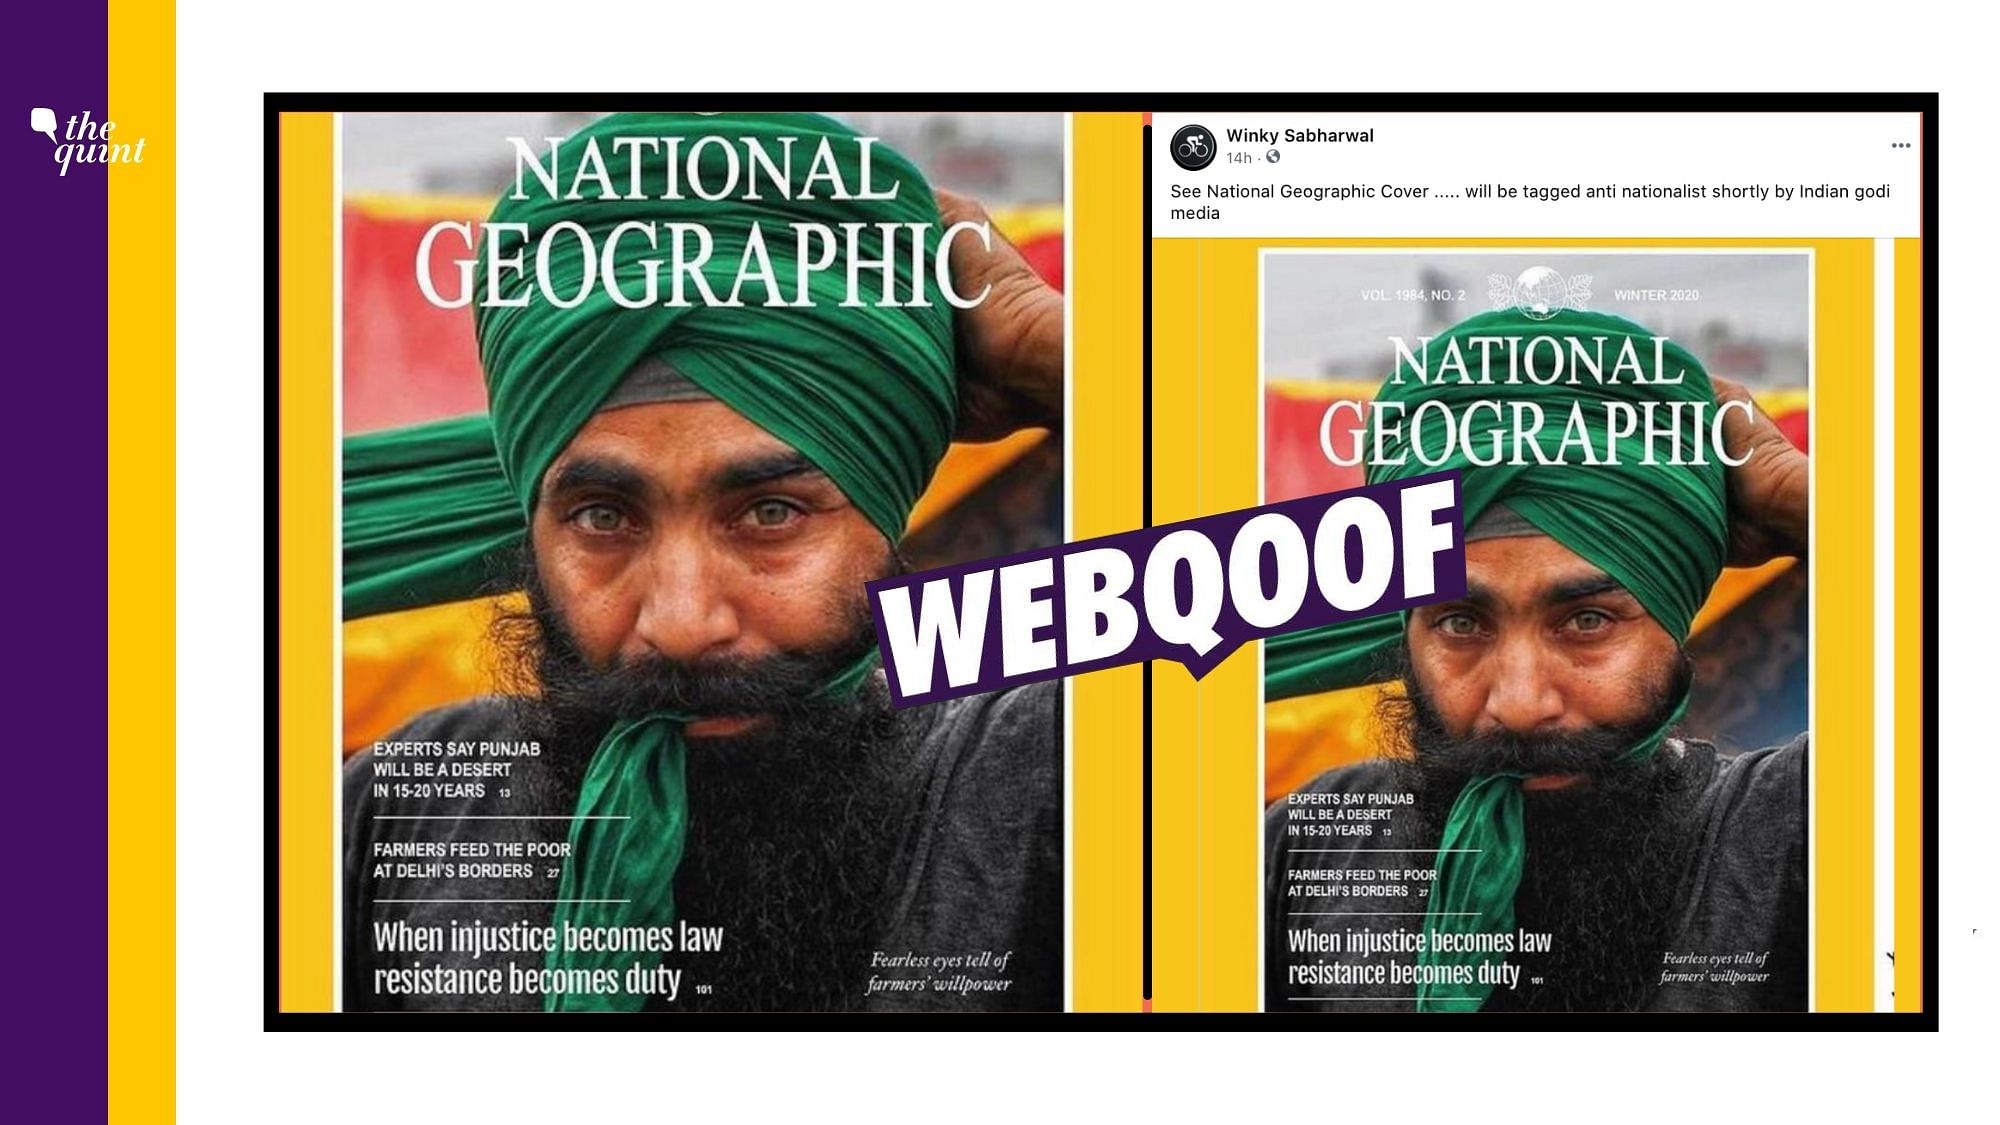 A fictitious cover made by an artiste was circulated to falsely claim that it is the official cover of the National Geographic magazine.